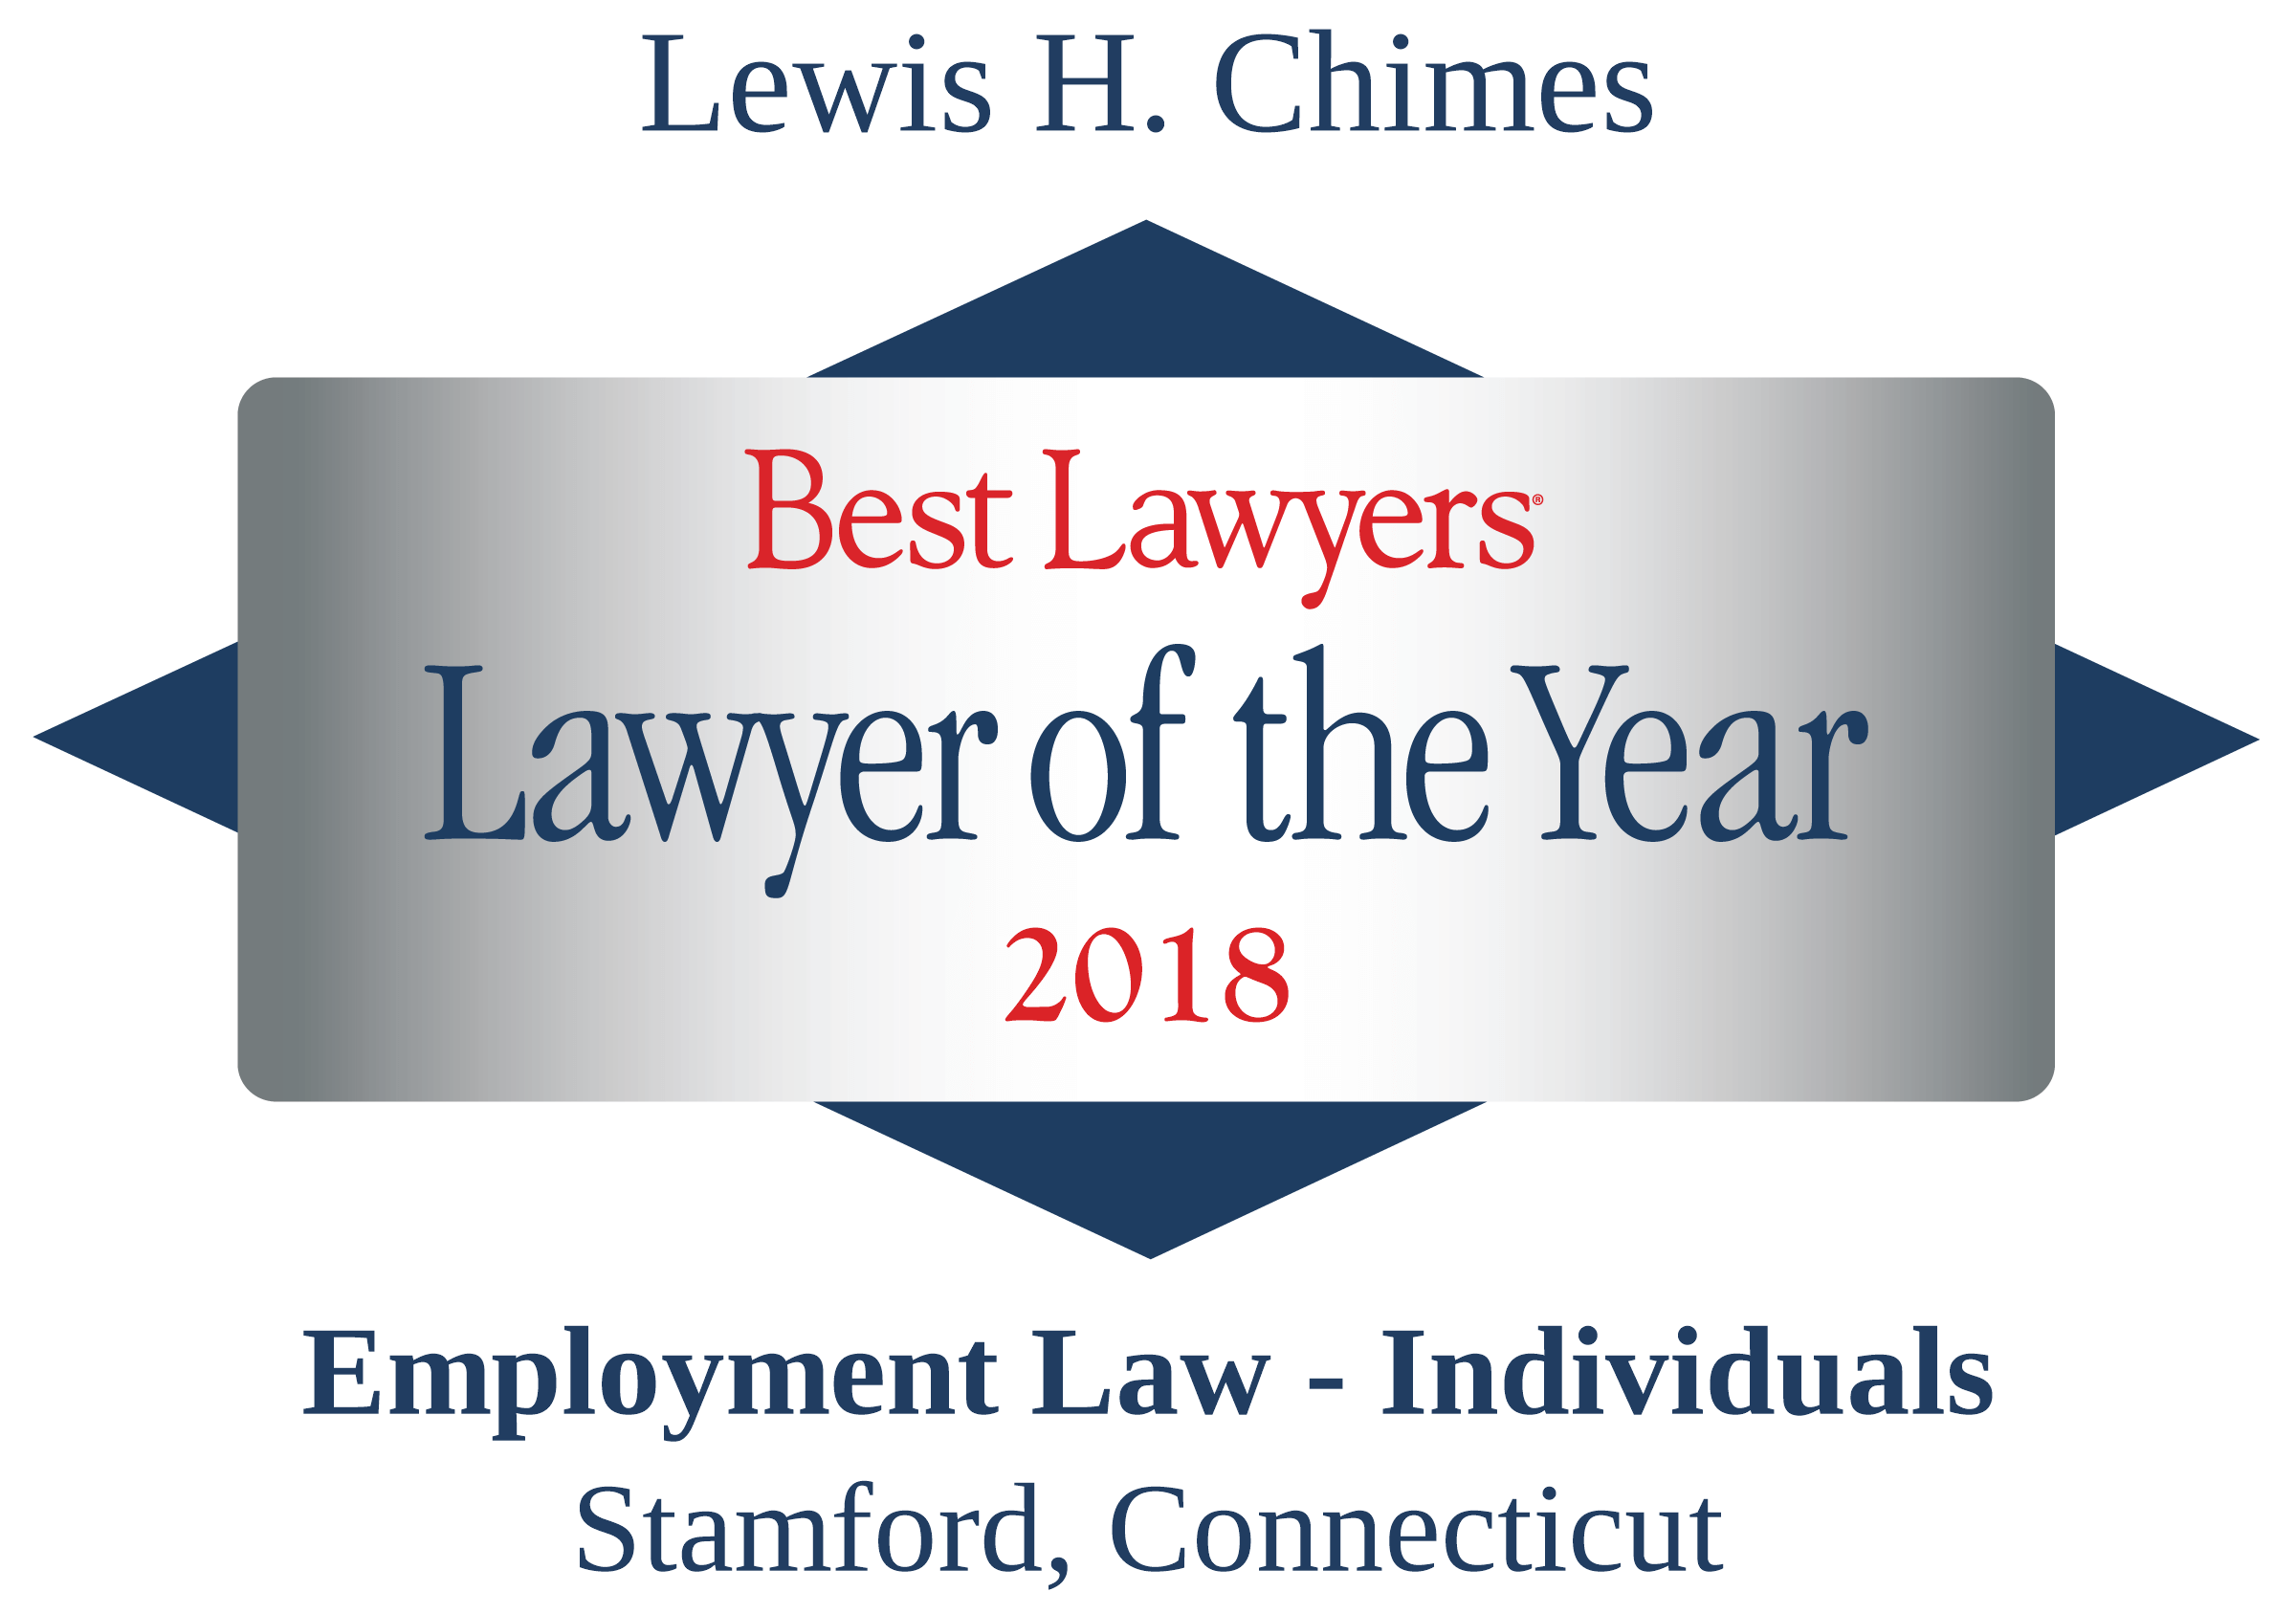 Lewis H. Chimes | Best Lawyers | Lawyer of the Year | 2018 | Employment Law - Individuals | Stamford, Connecticut